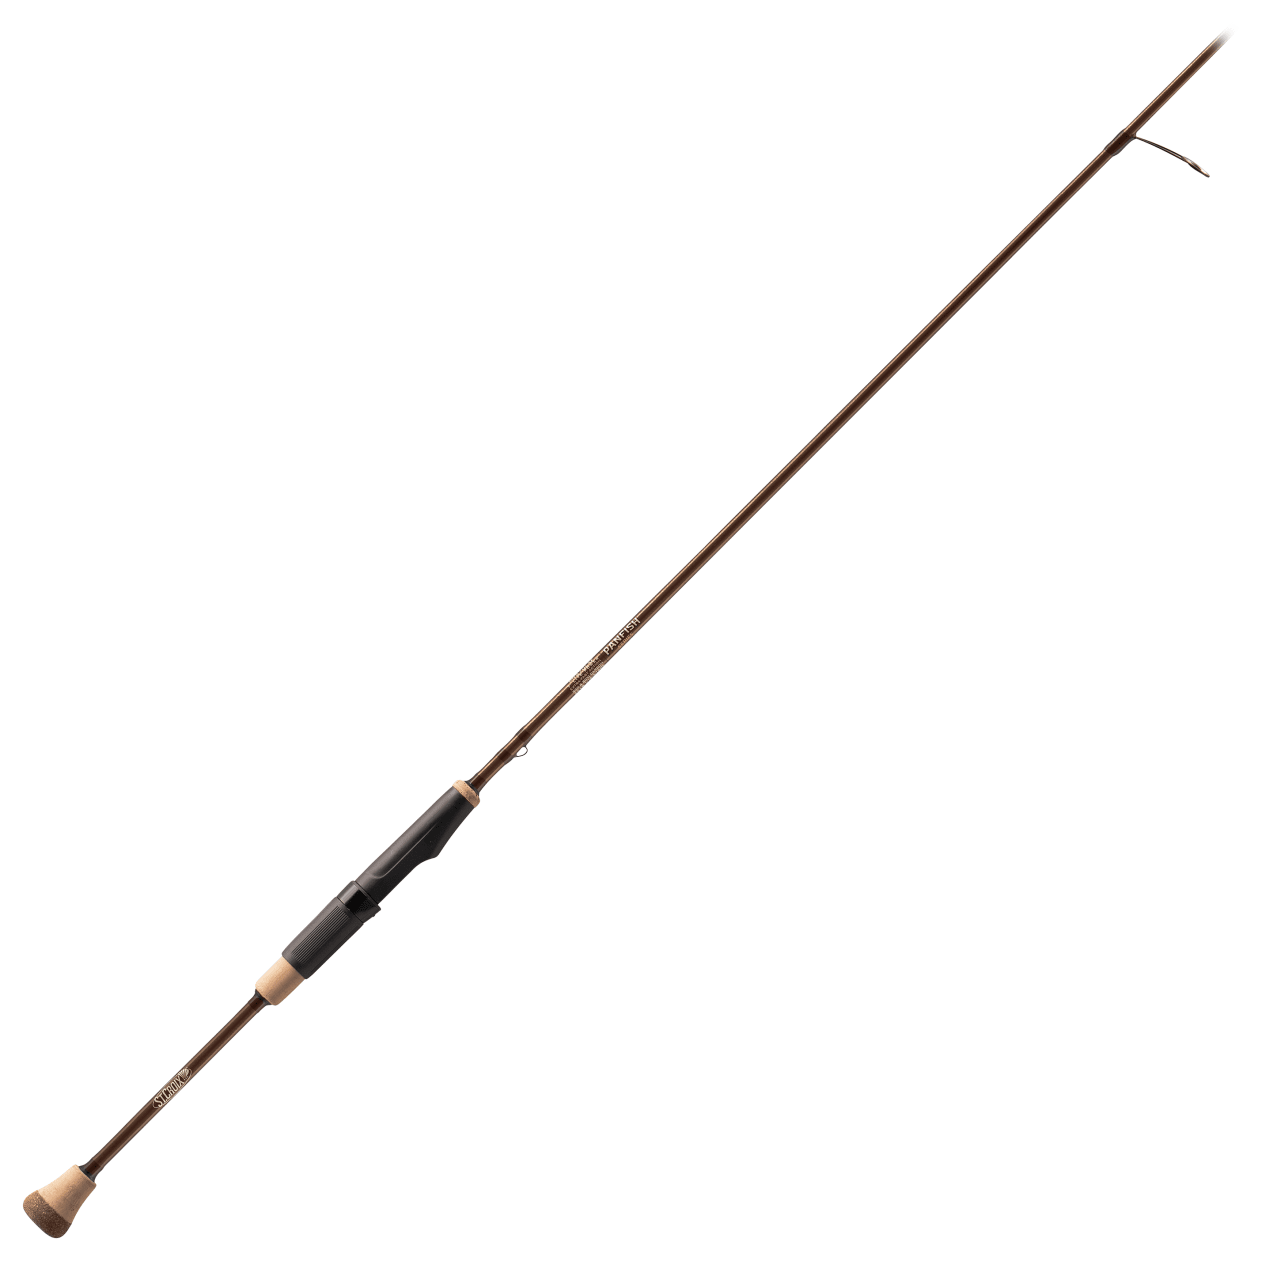 St. Croix Panfish Series Spinning Rod - Hamilton Bait and Tackle